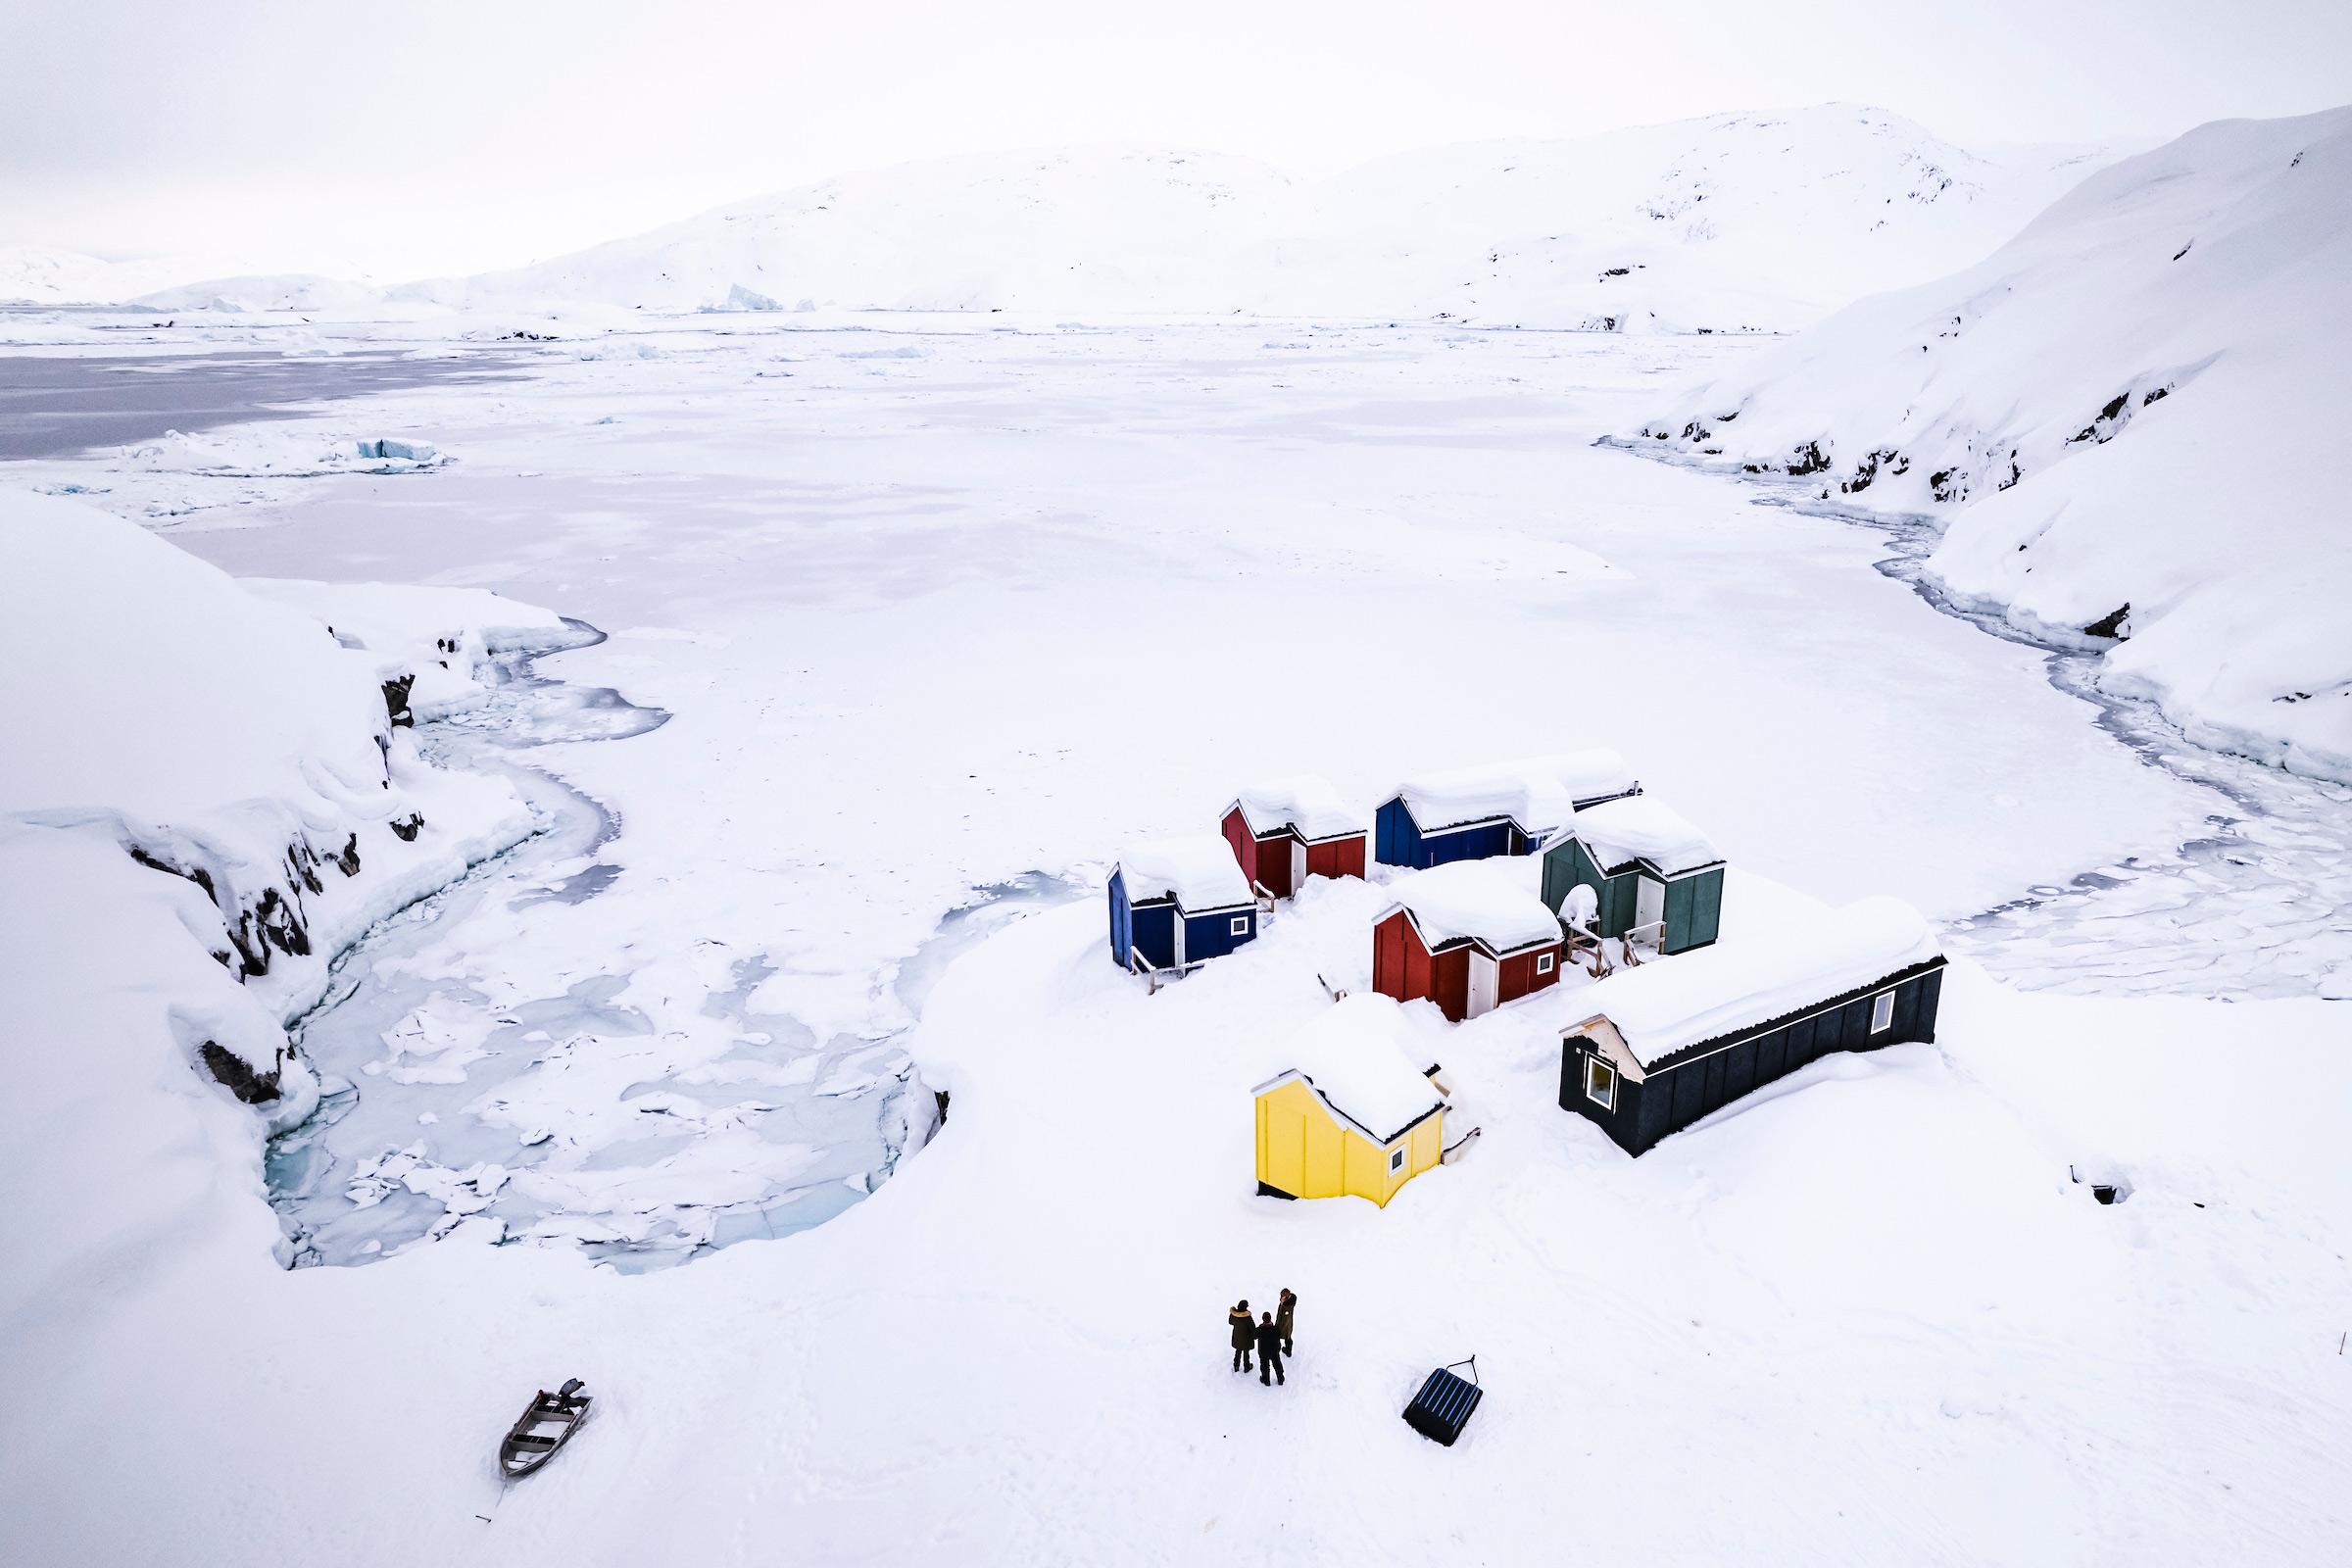 The camp by Arctic Dream. The Icecamp. Photo by Aningaaq Rosing Carlsen - Visit Greenland